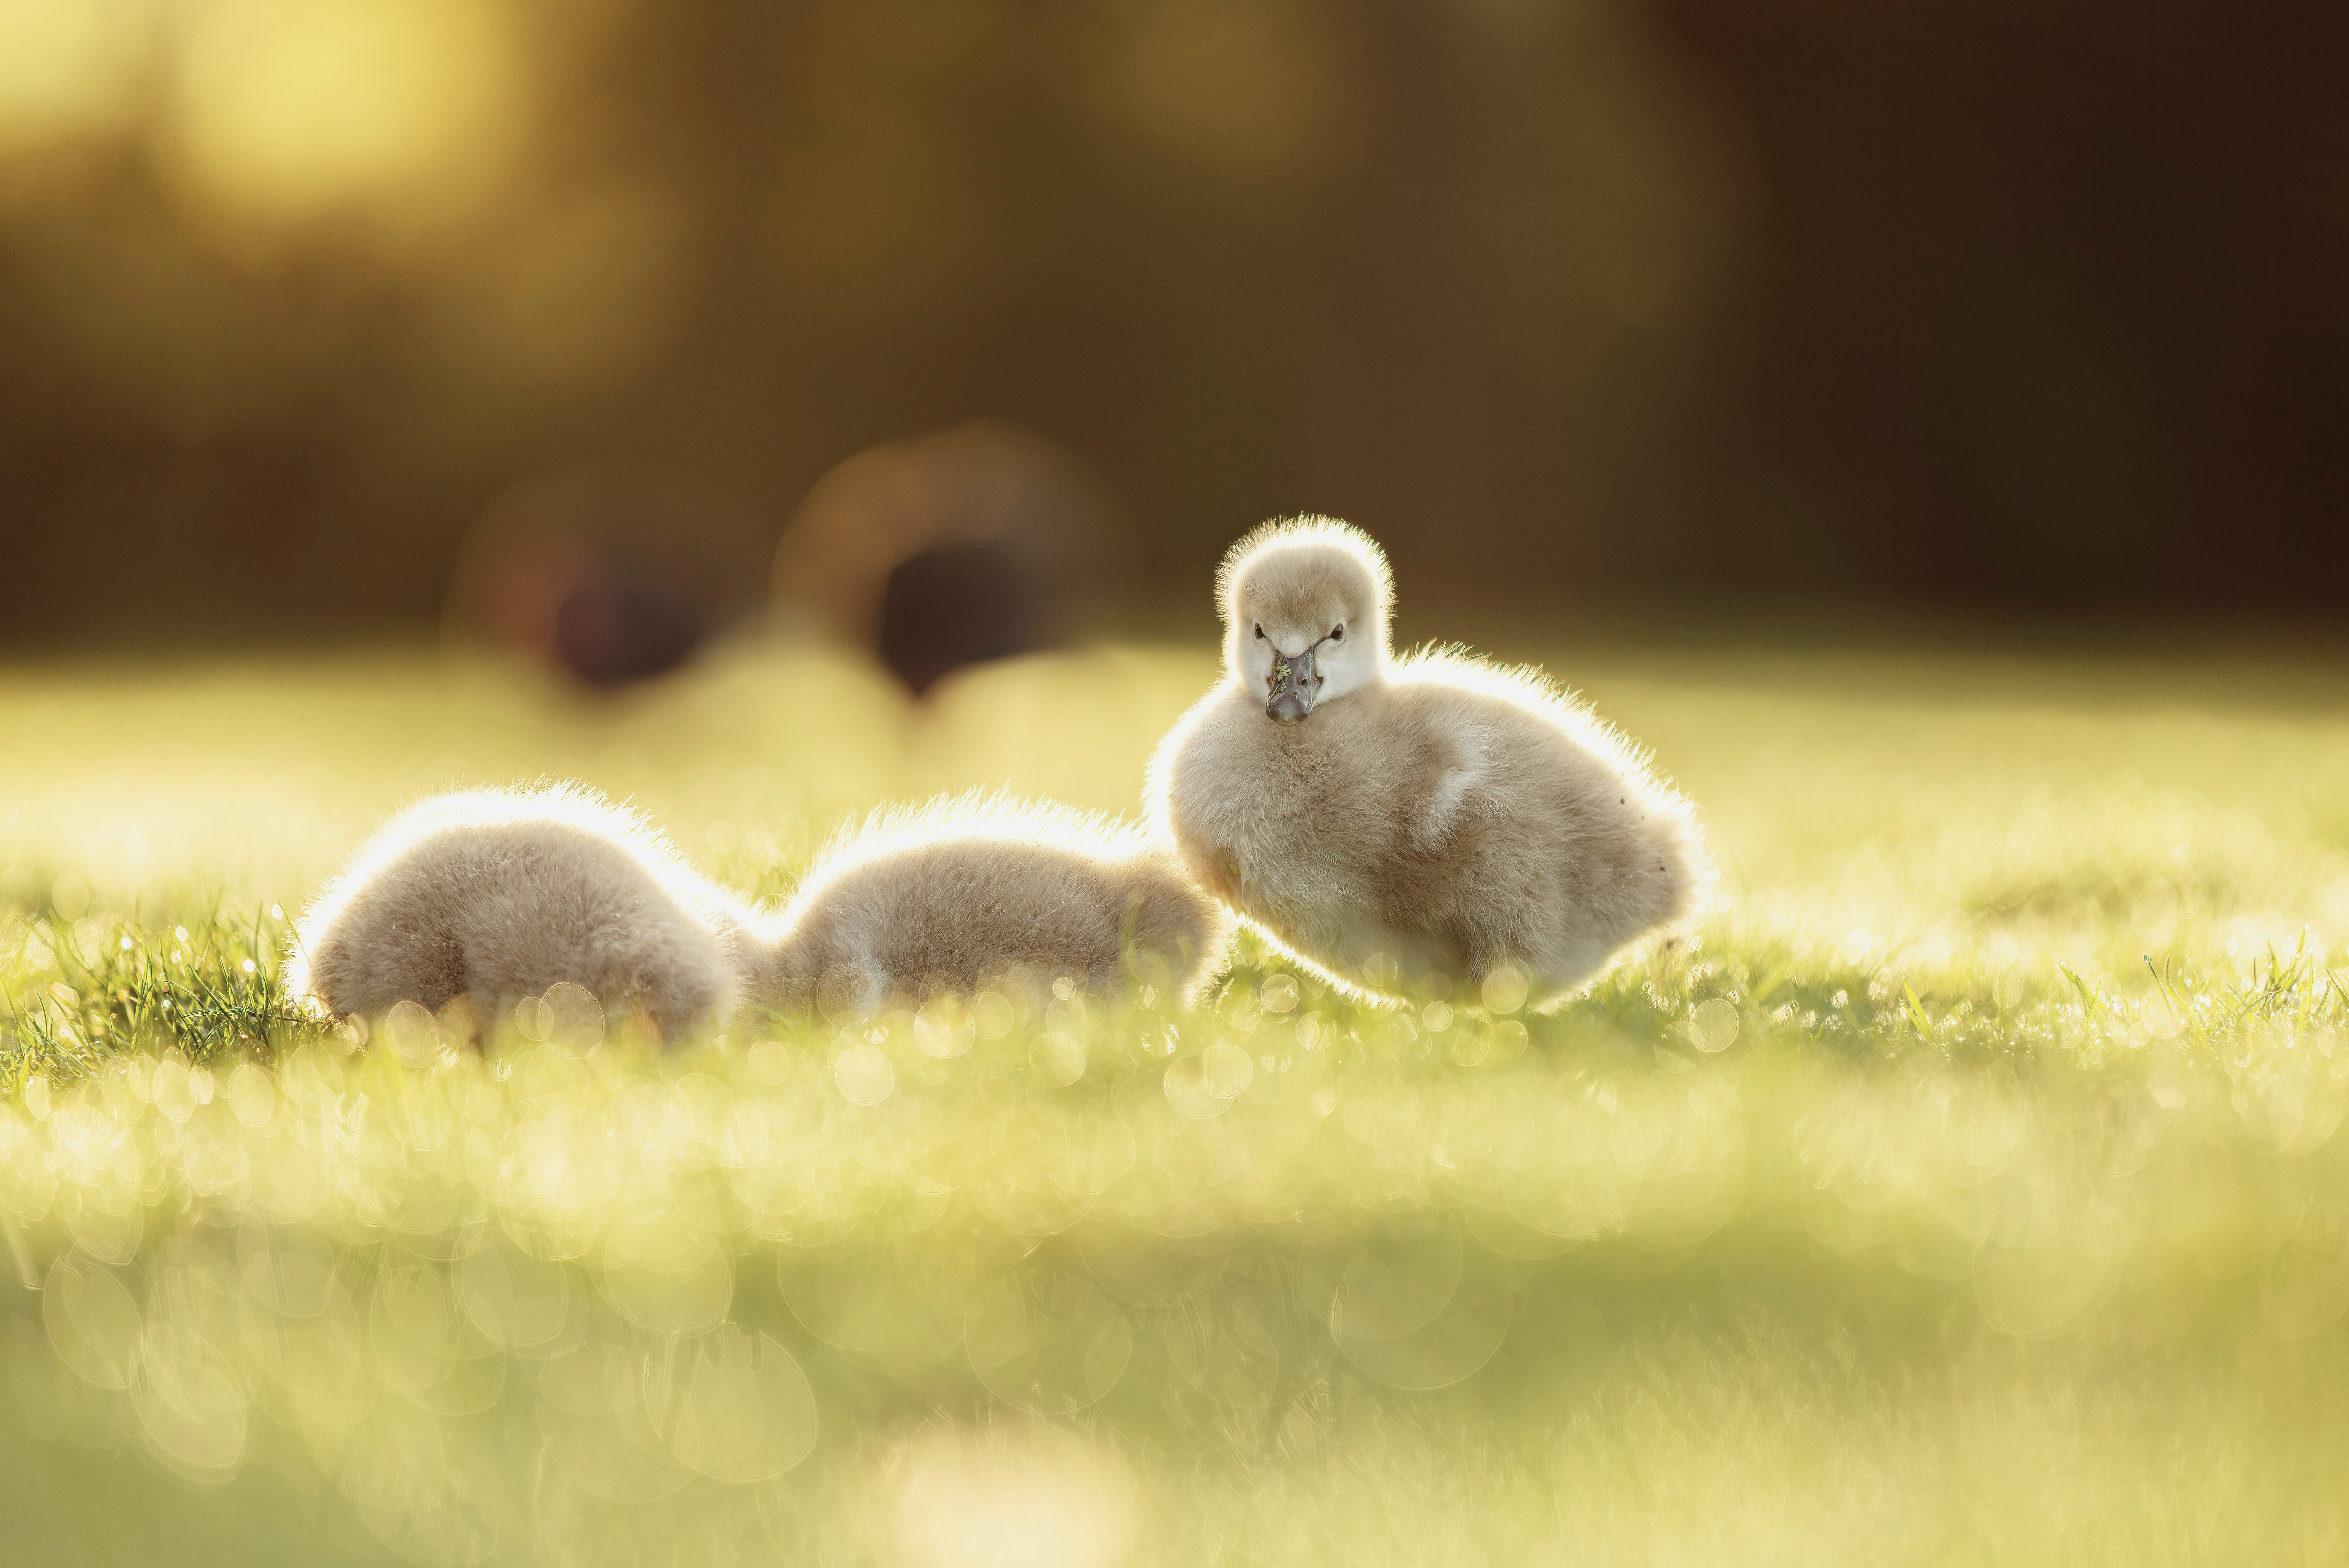 white ducklings on green grass during daytime